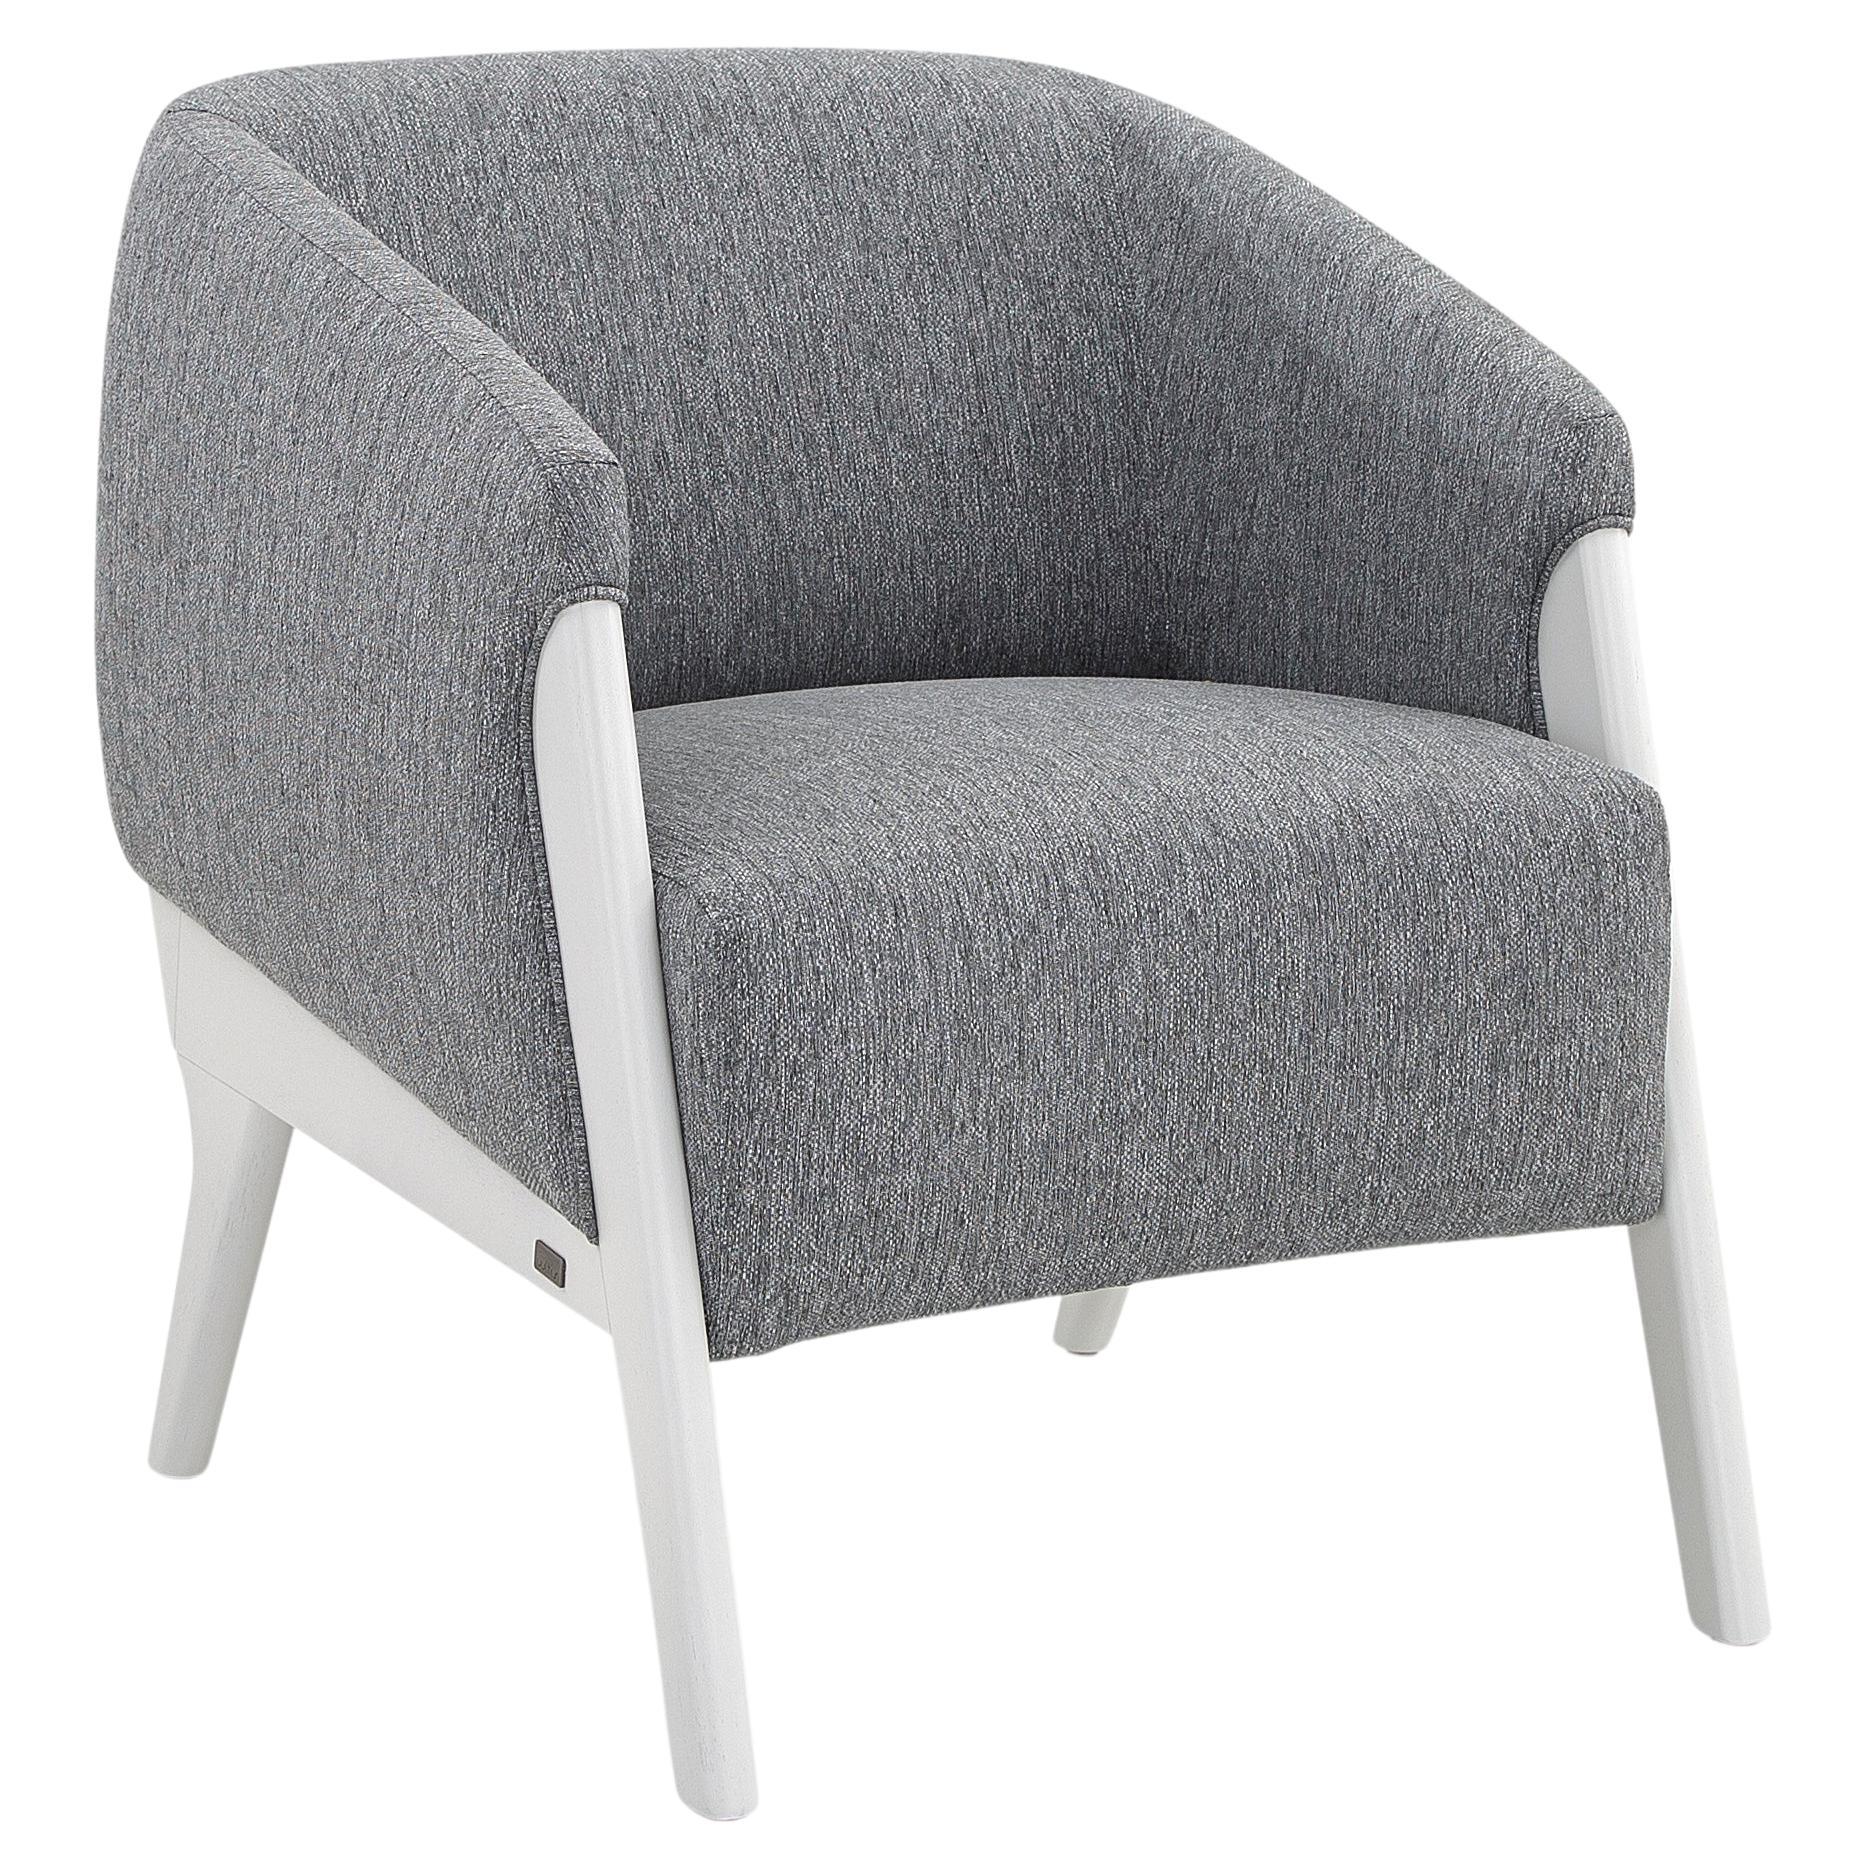 Abra Armchair in Gray Fabric and White Wood Finish